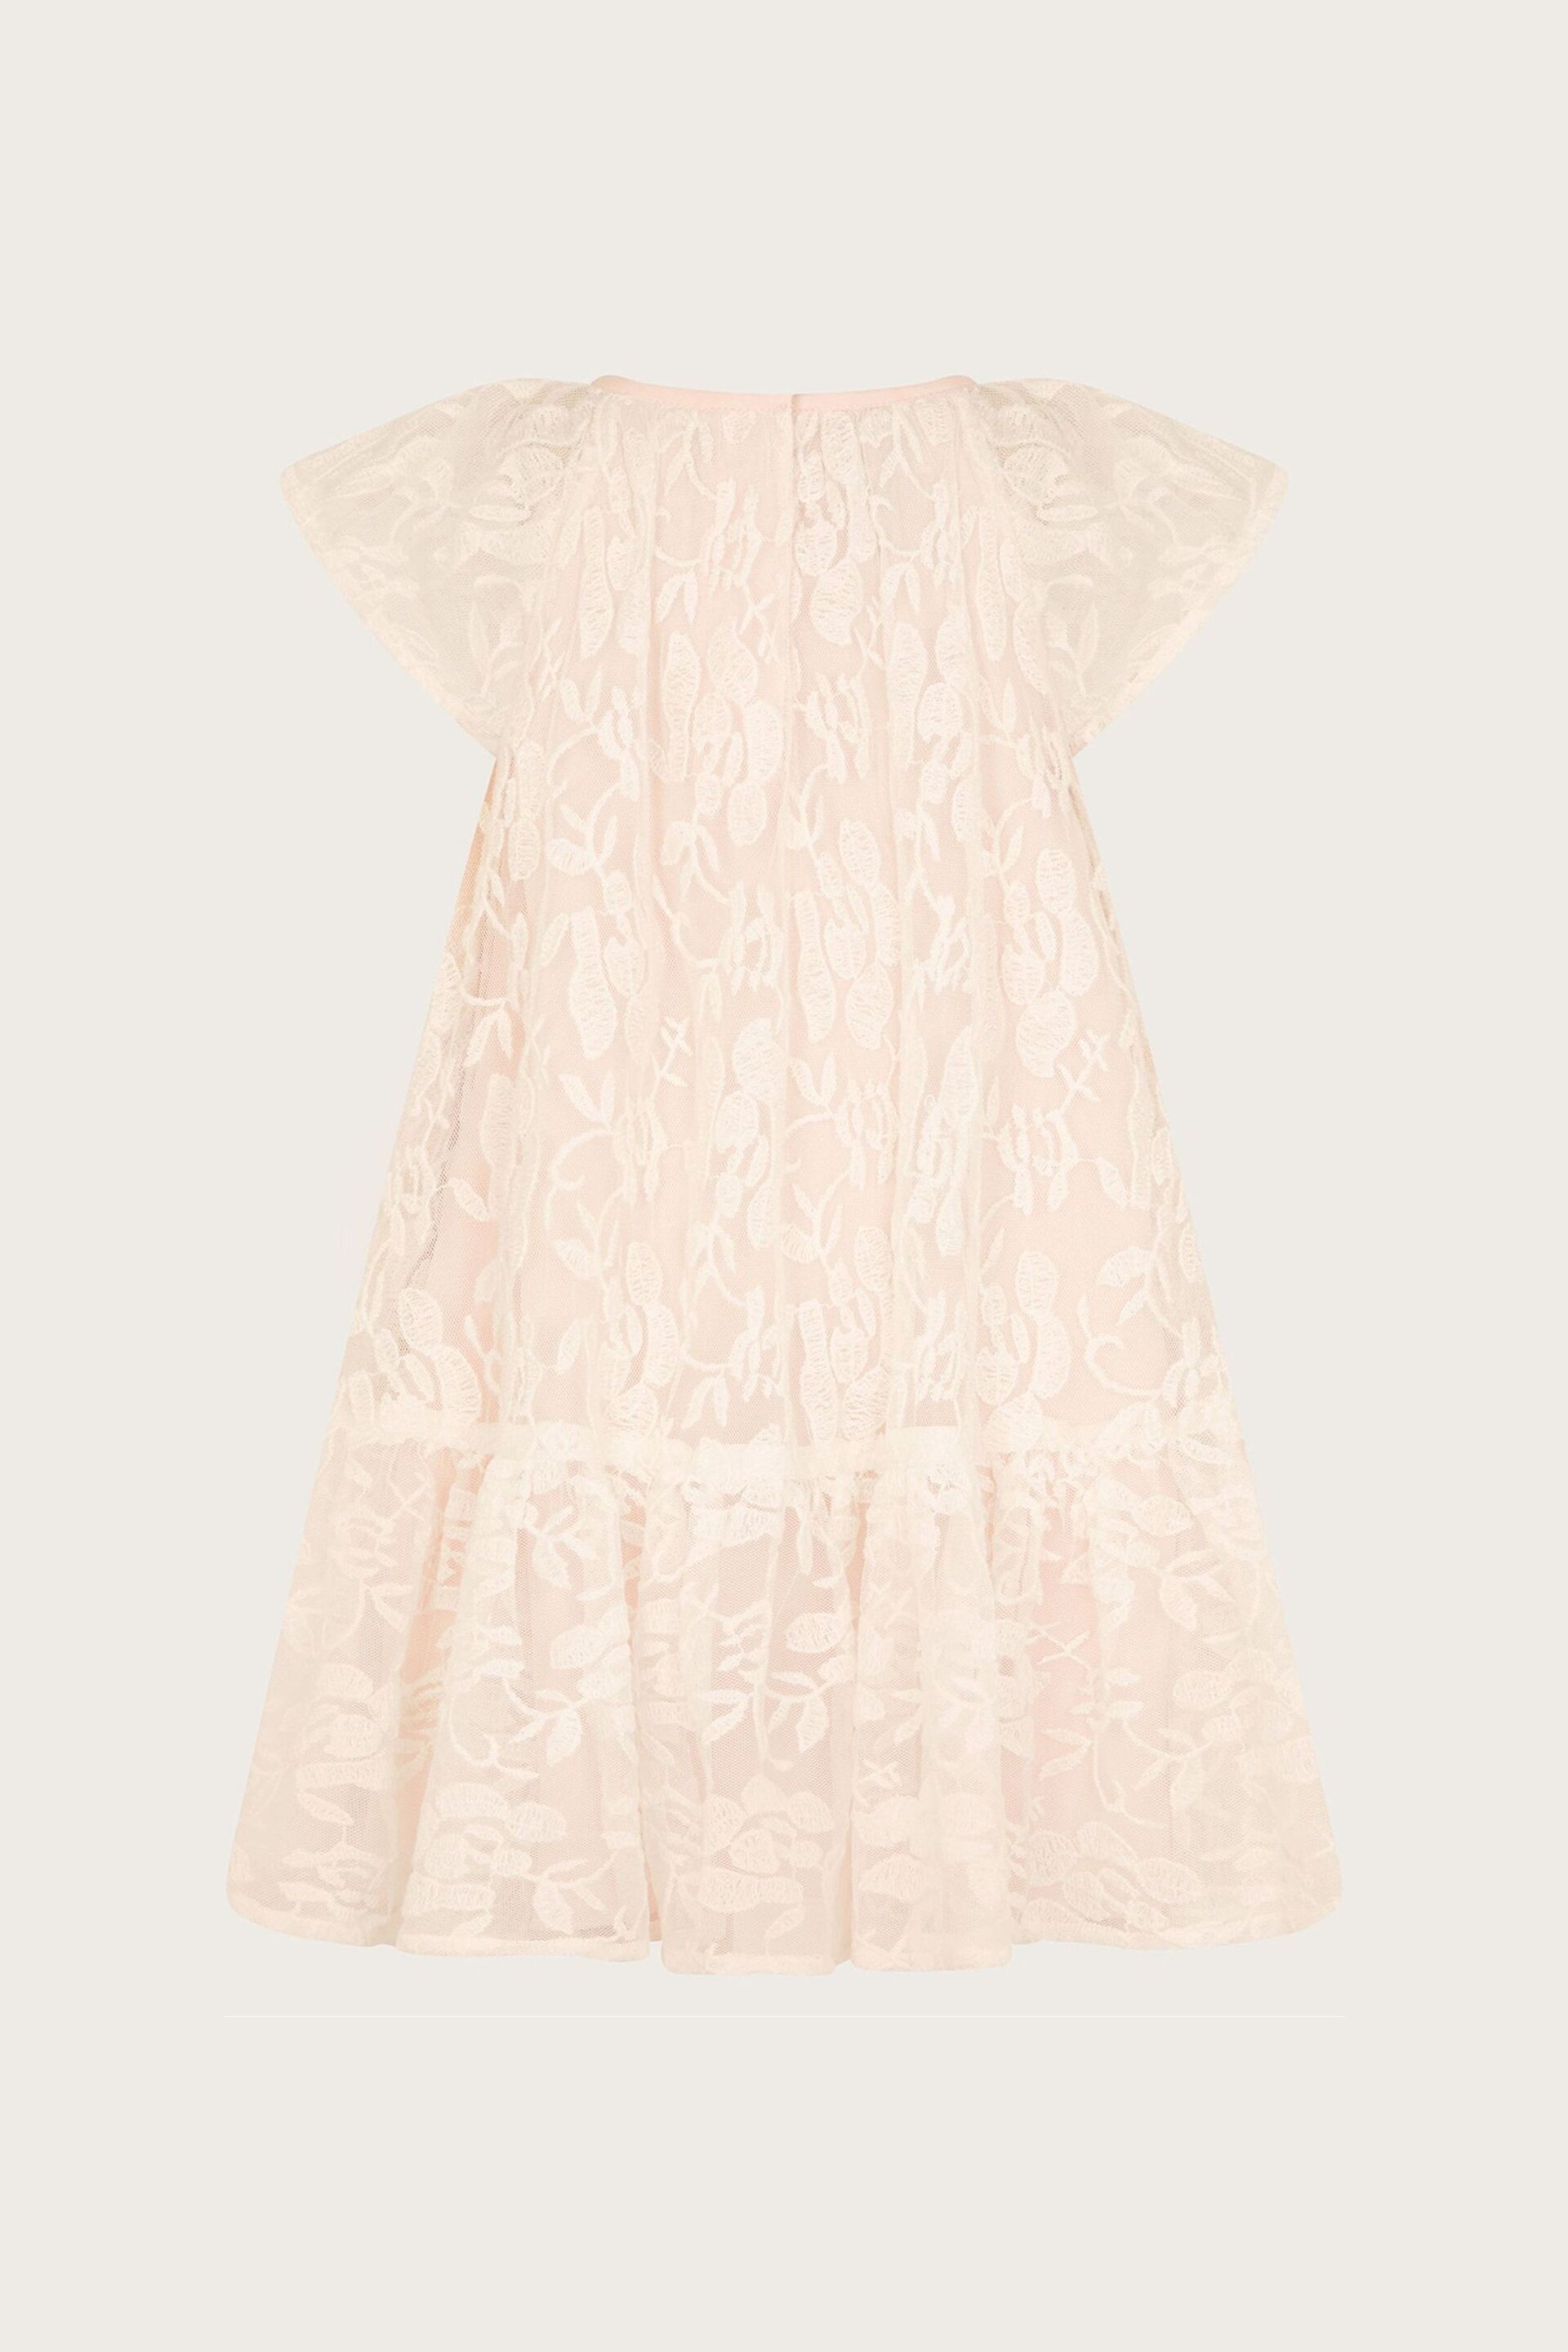 Monsoon Pink Baby Annette Lace Dress - Image 2 of 3